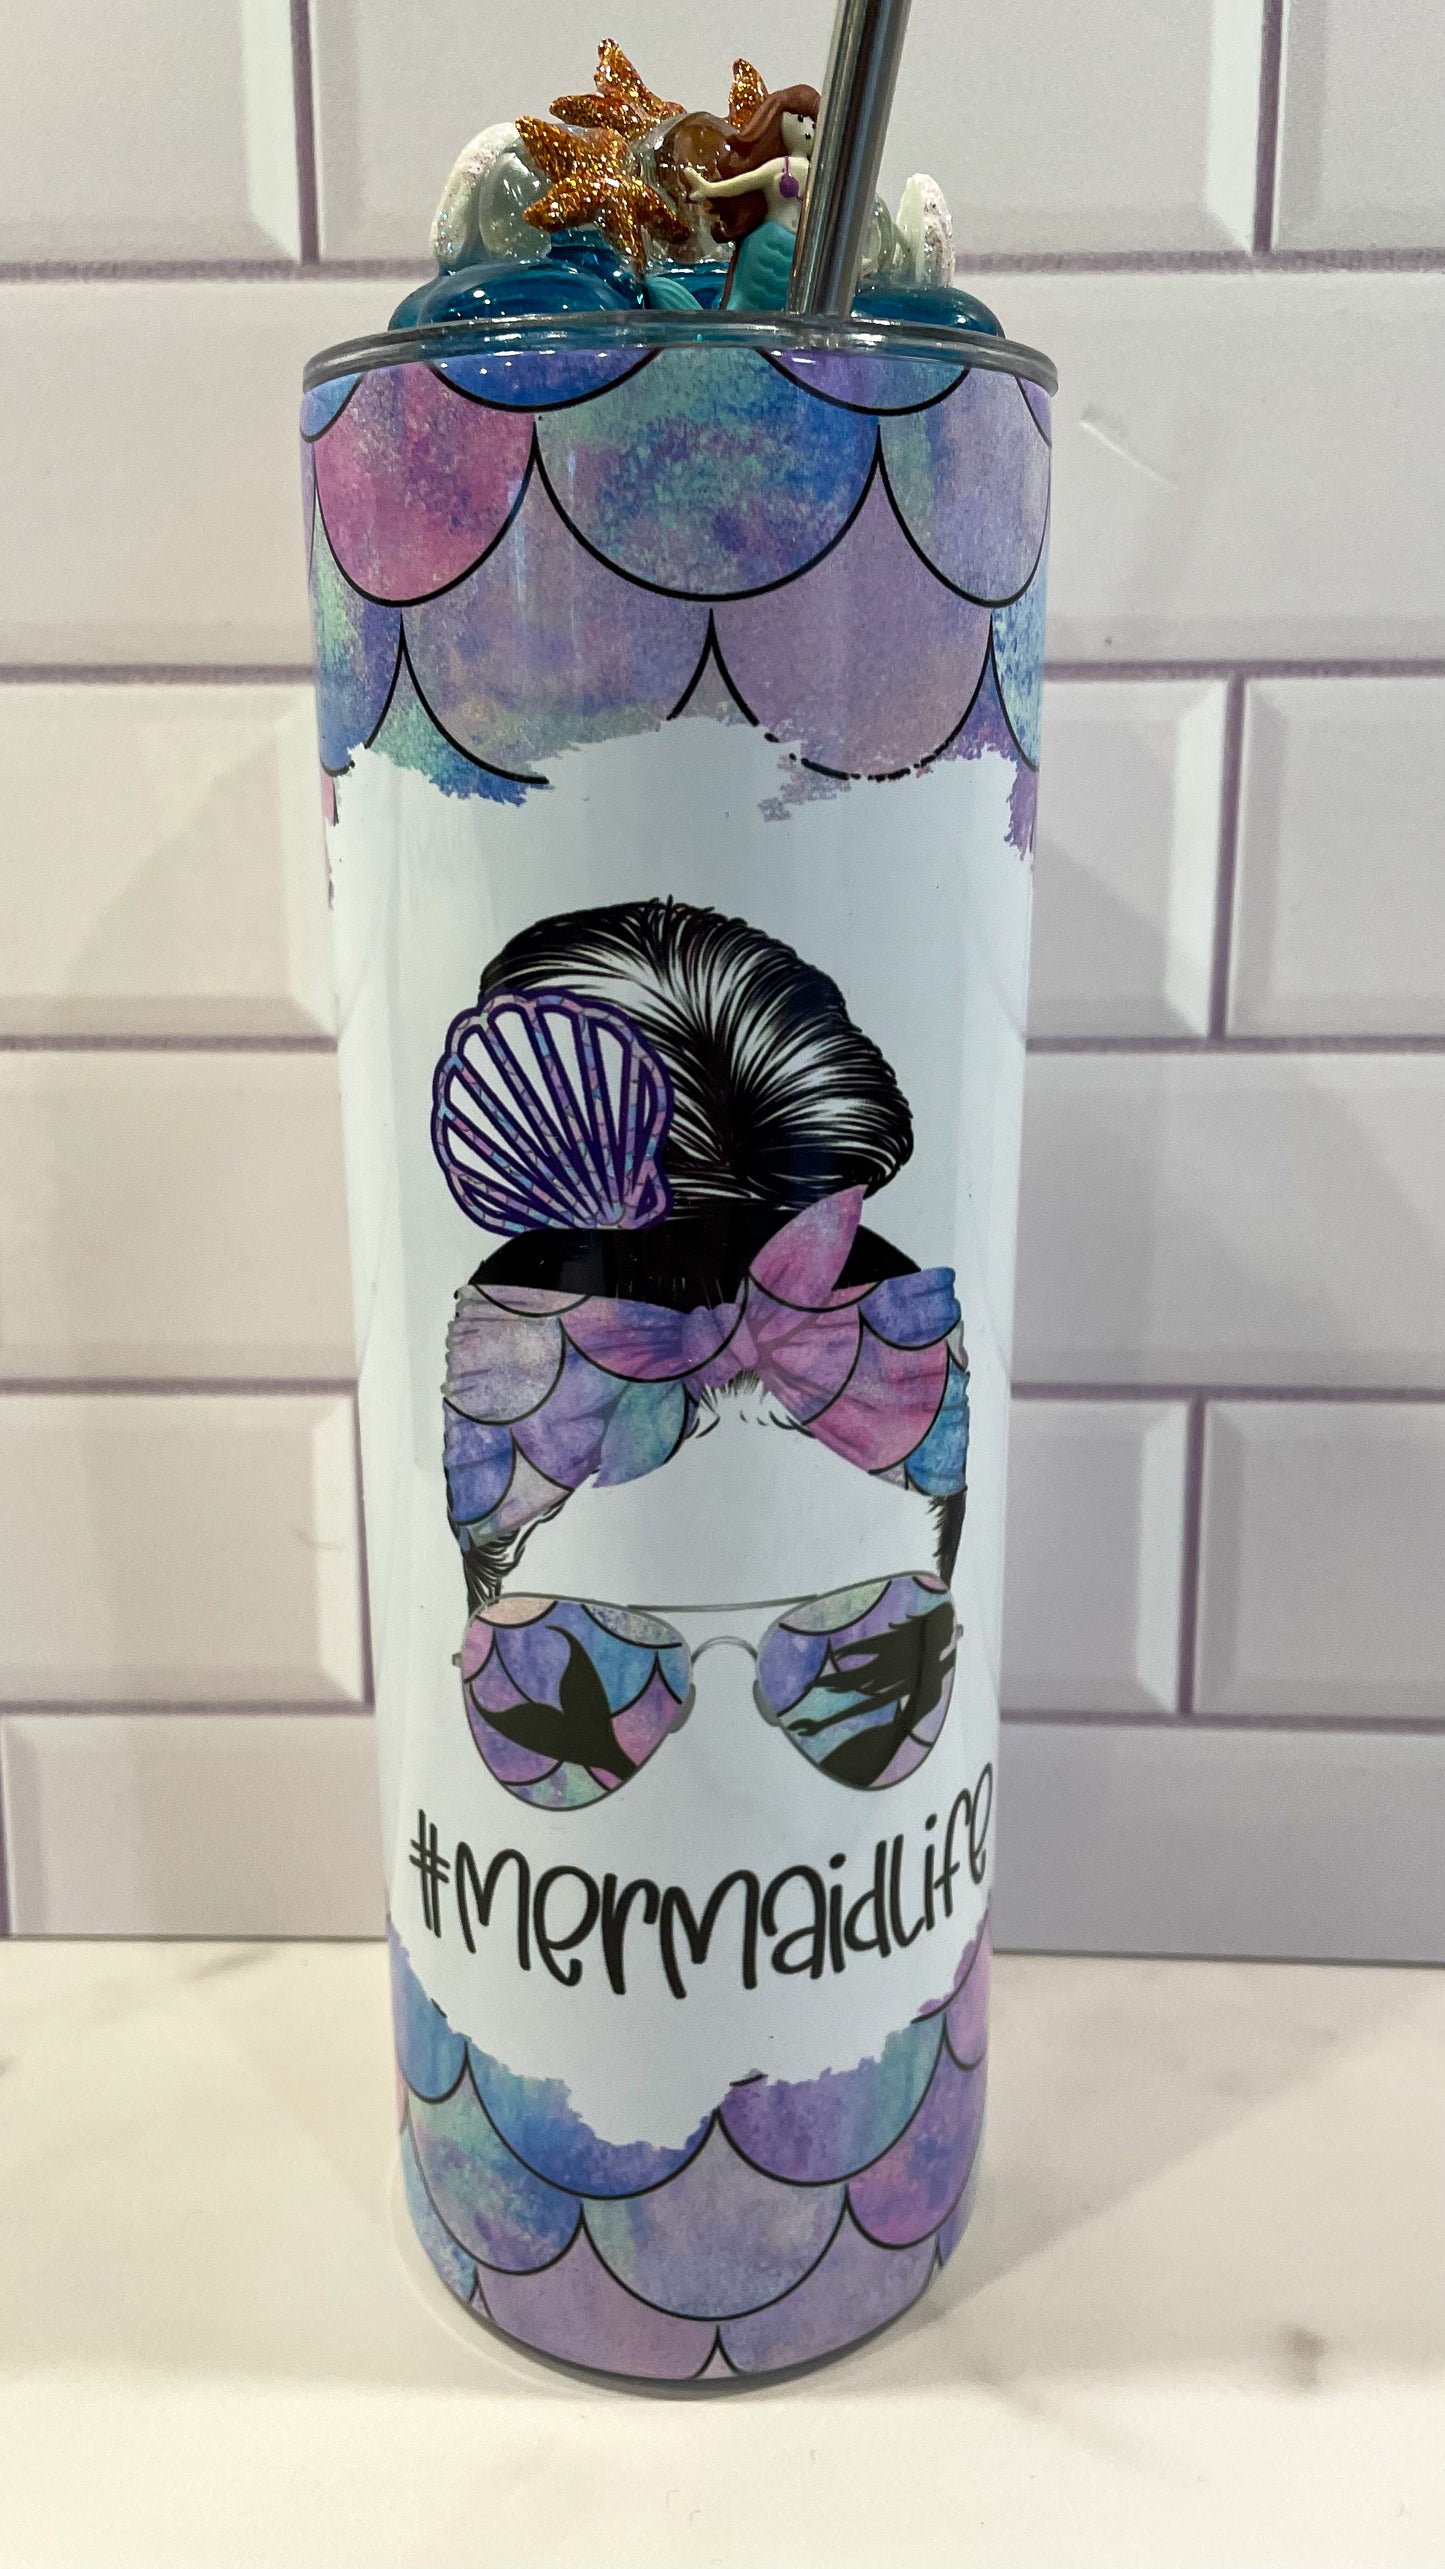 Mermaid Life with 3d Removable topper lid.